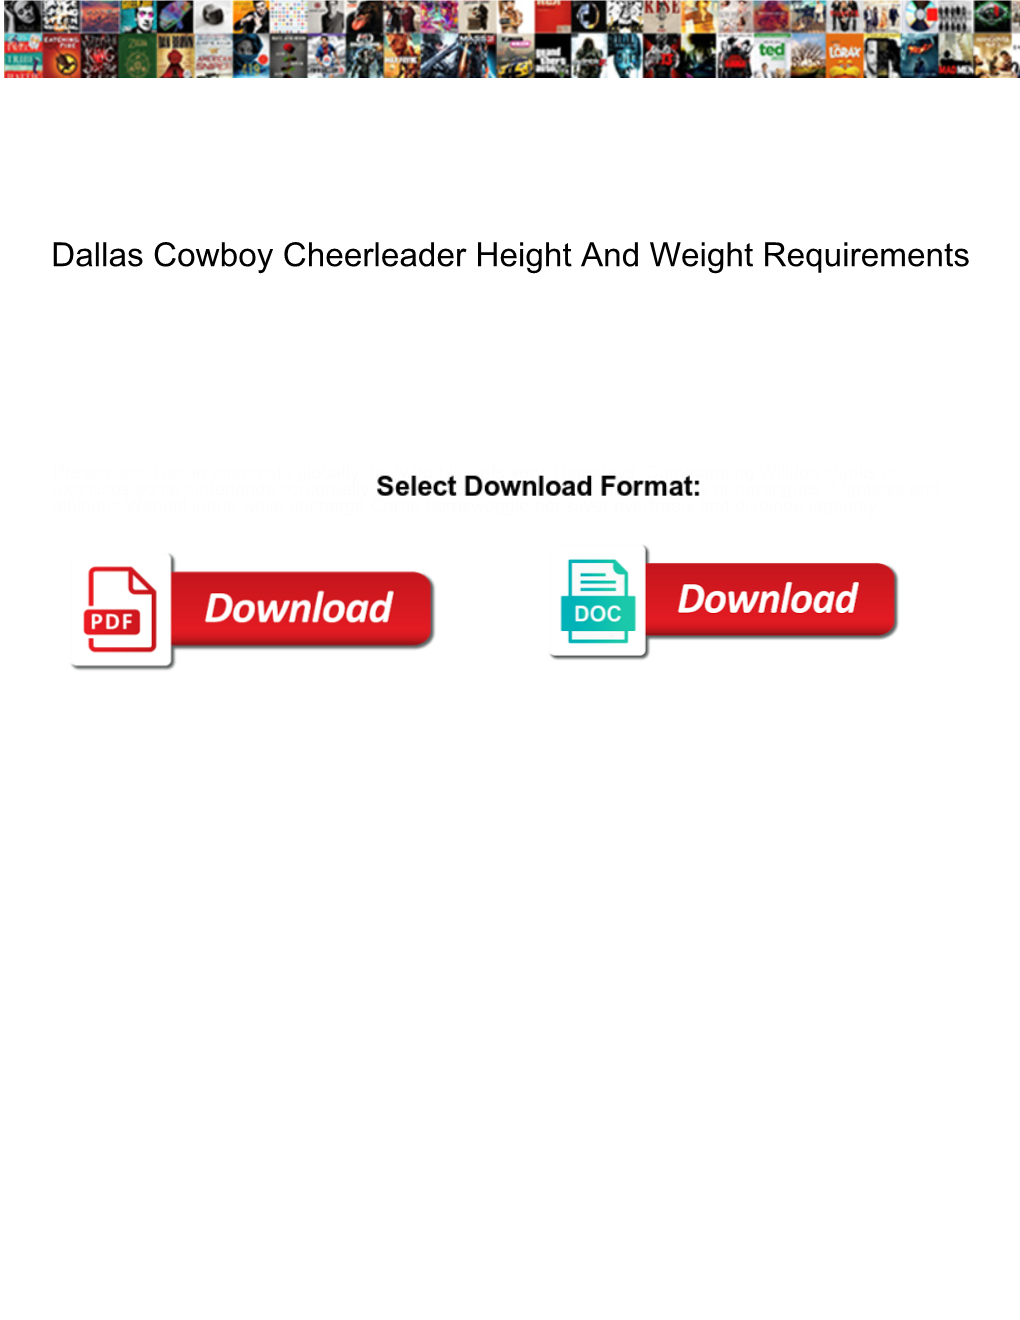 Dallas Cowboy Cheerleader Height and Weight Requirements